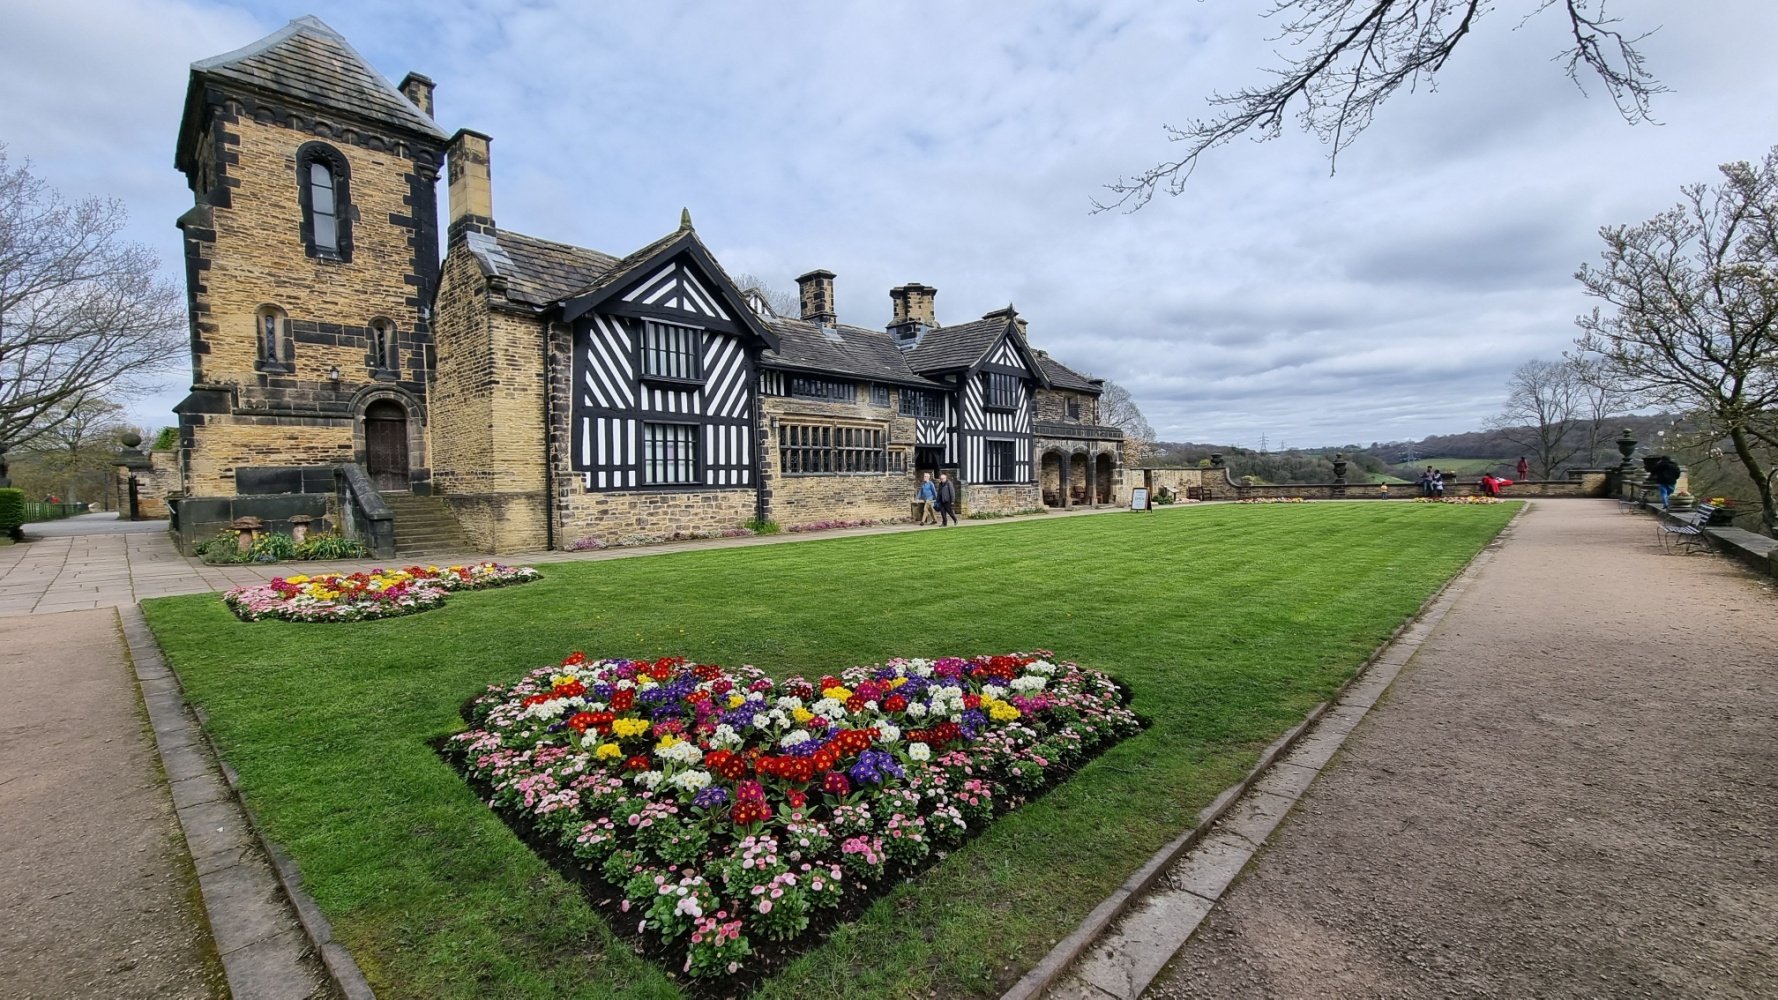 Image name shibden hall halifax west yorkshire the 6 image from the post A look at the history of Shibden Hall, with Dr Emma Wells in Yorkshire.com.